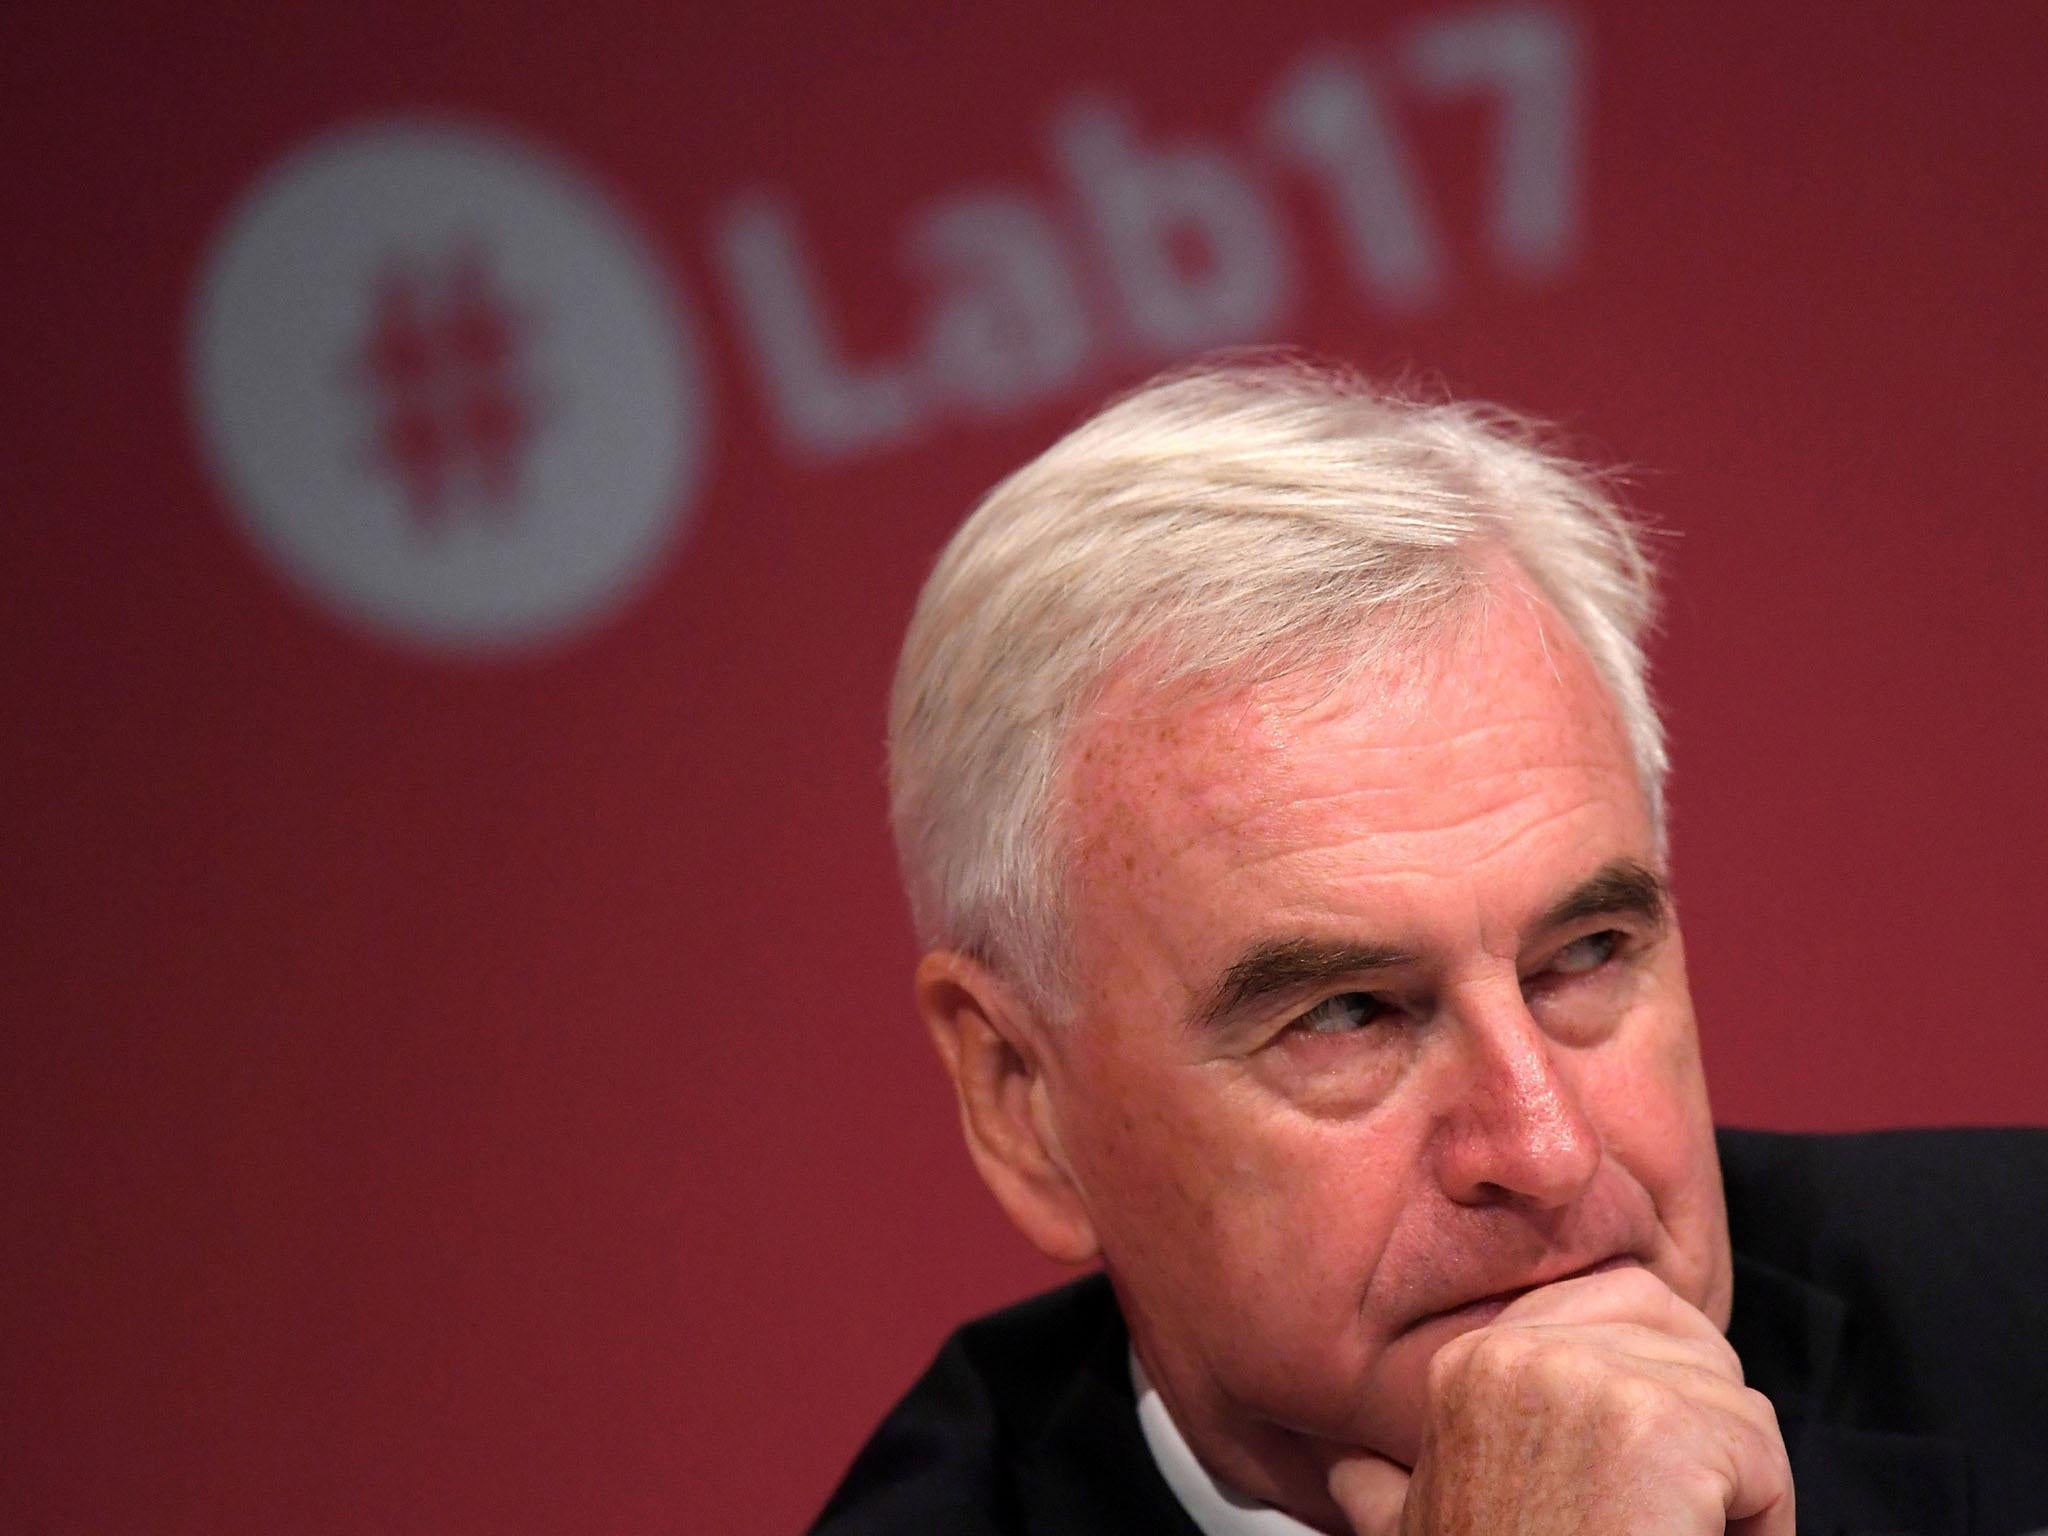 Shadow Chancellor John McDonnell plans to wind up PFI contracts